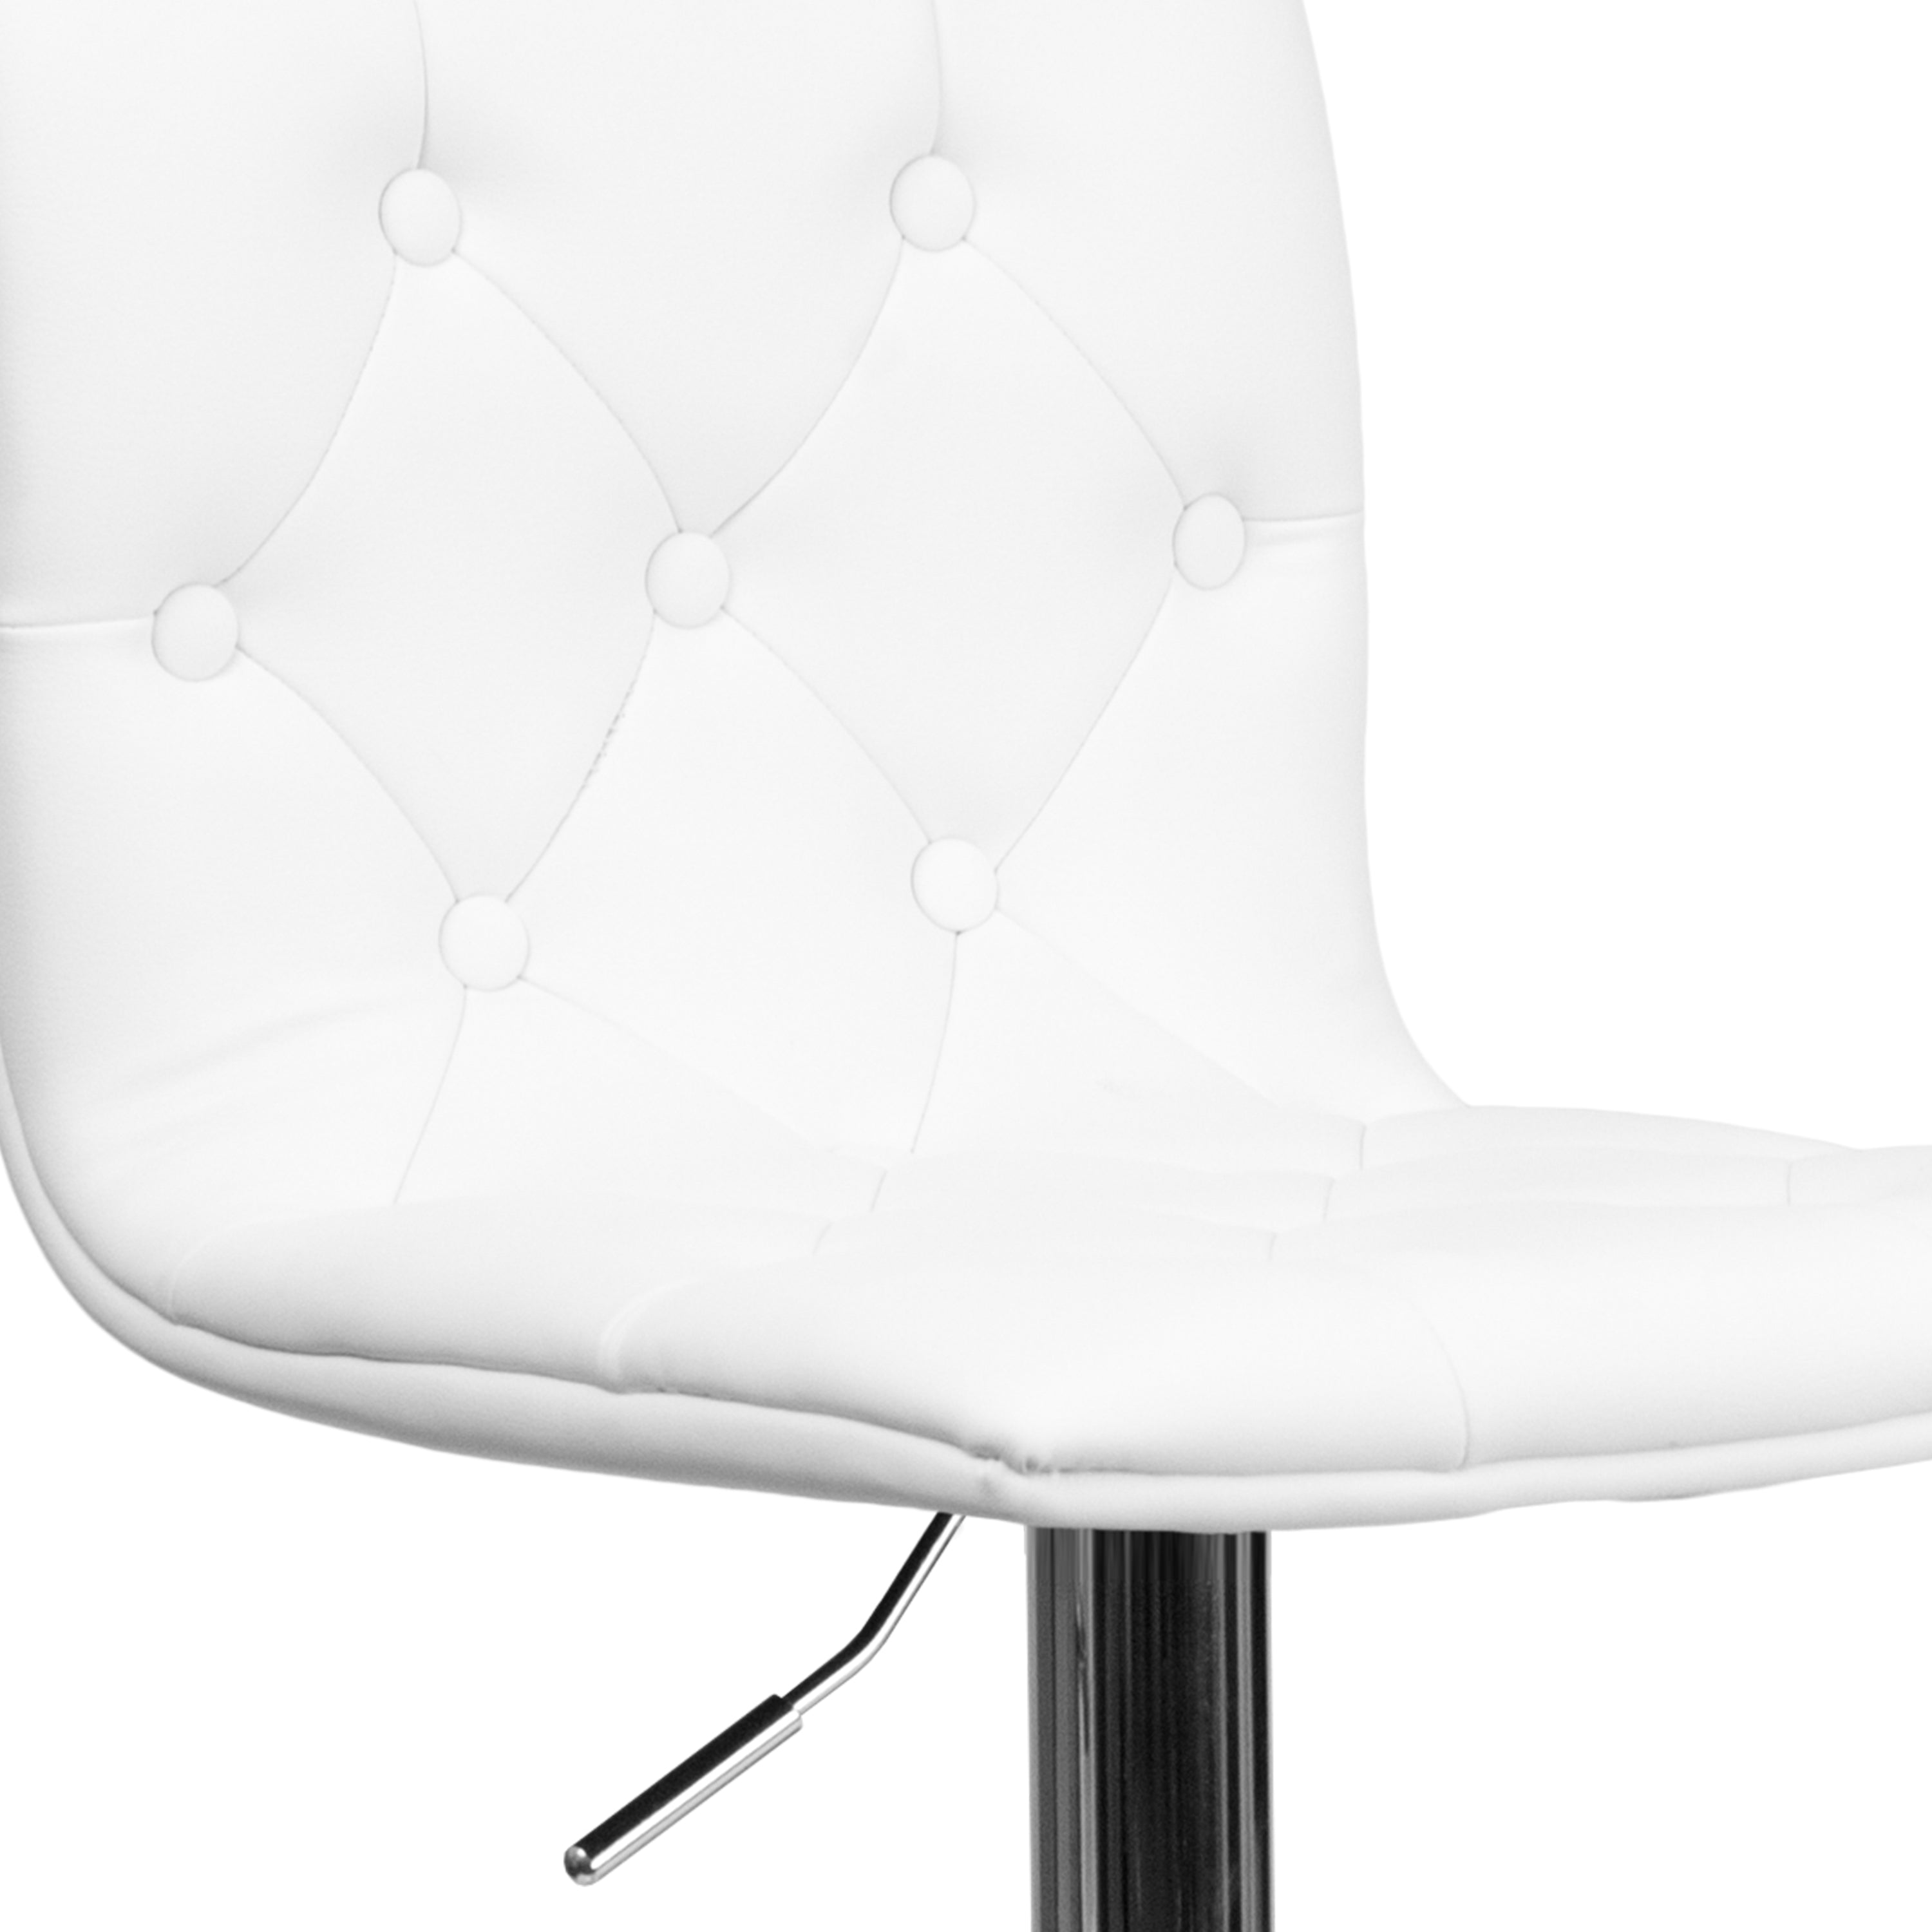 Contemporary Button Tufted Vinyl Adjustable Height Barstool with Chrome Base-Bar Stool-Flash Furniture-Wall2Wall Furnishings